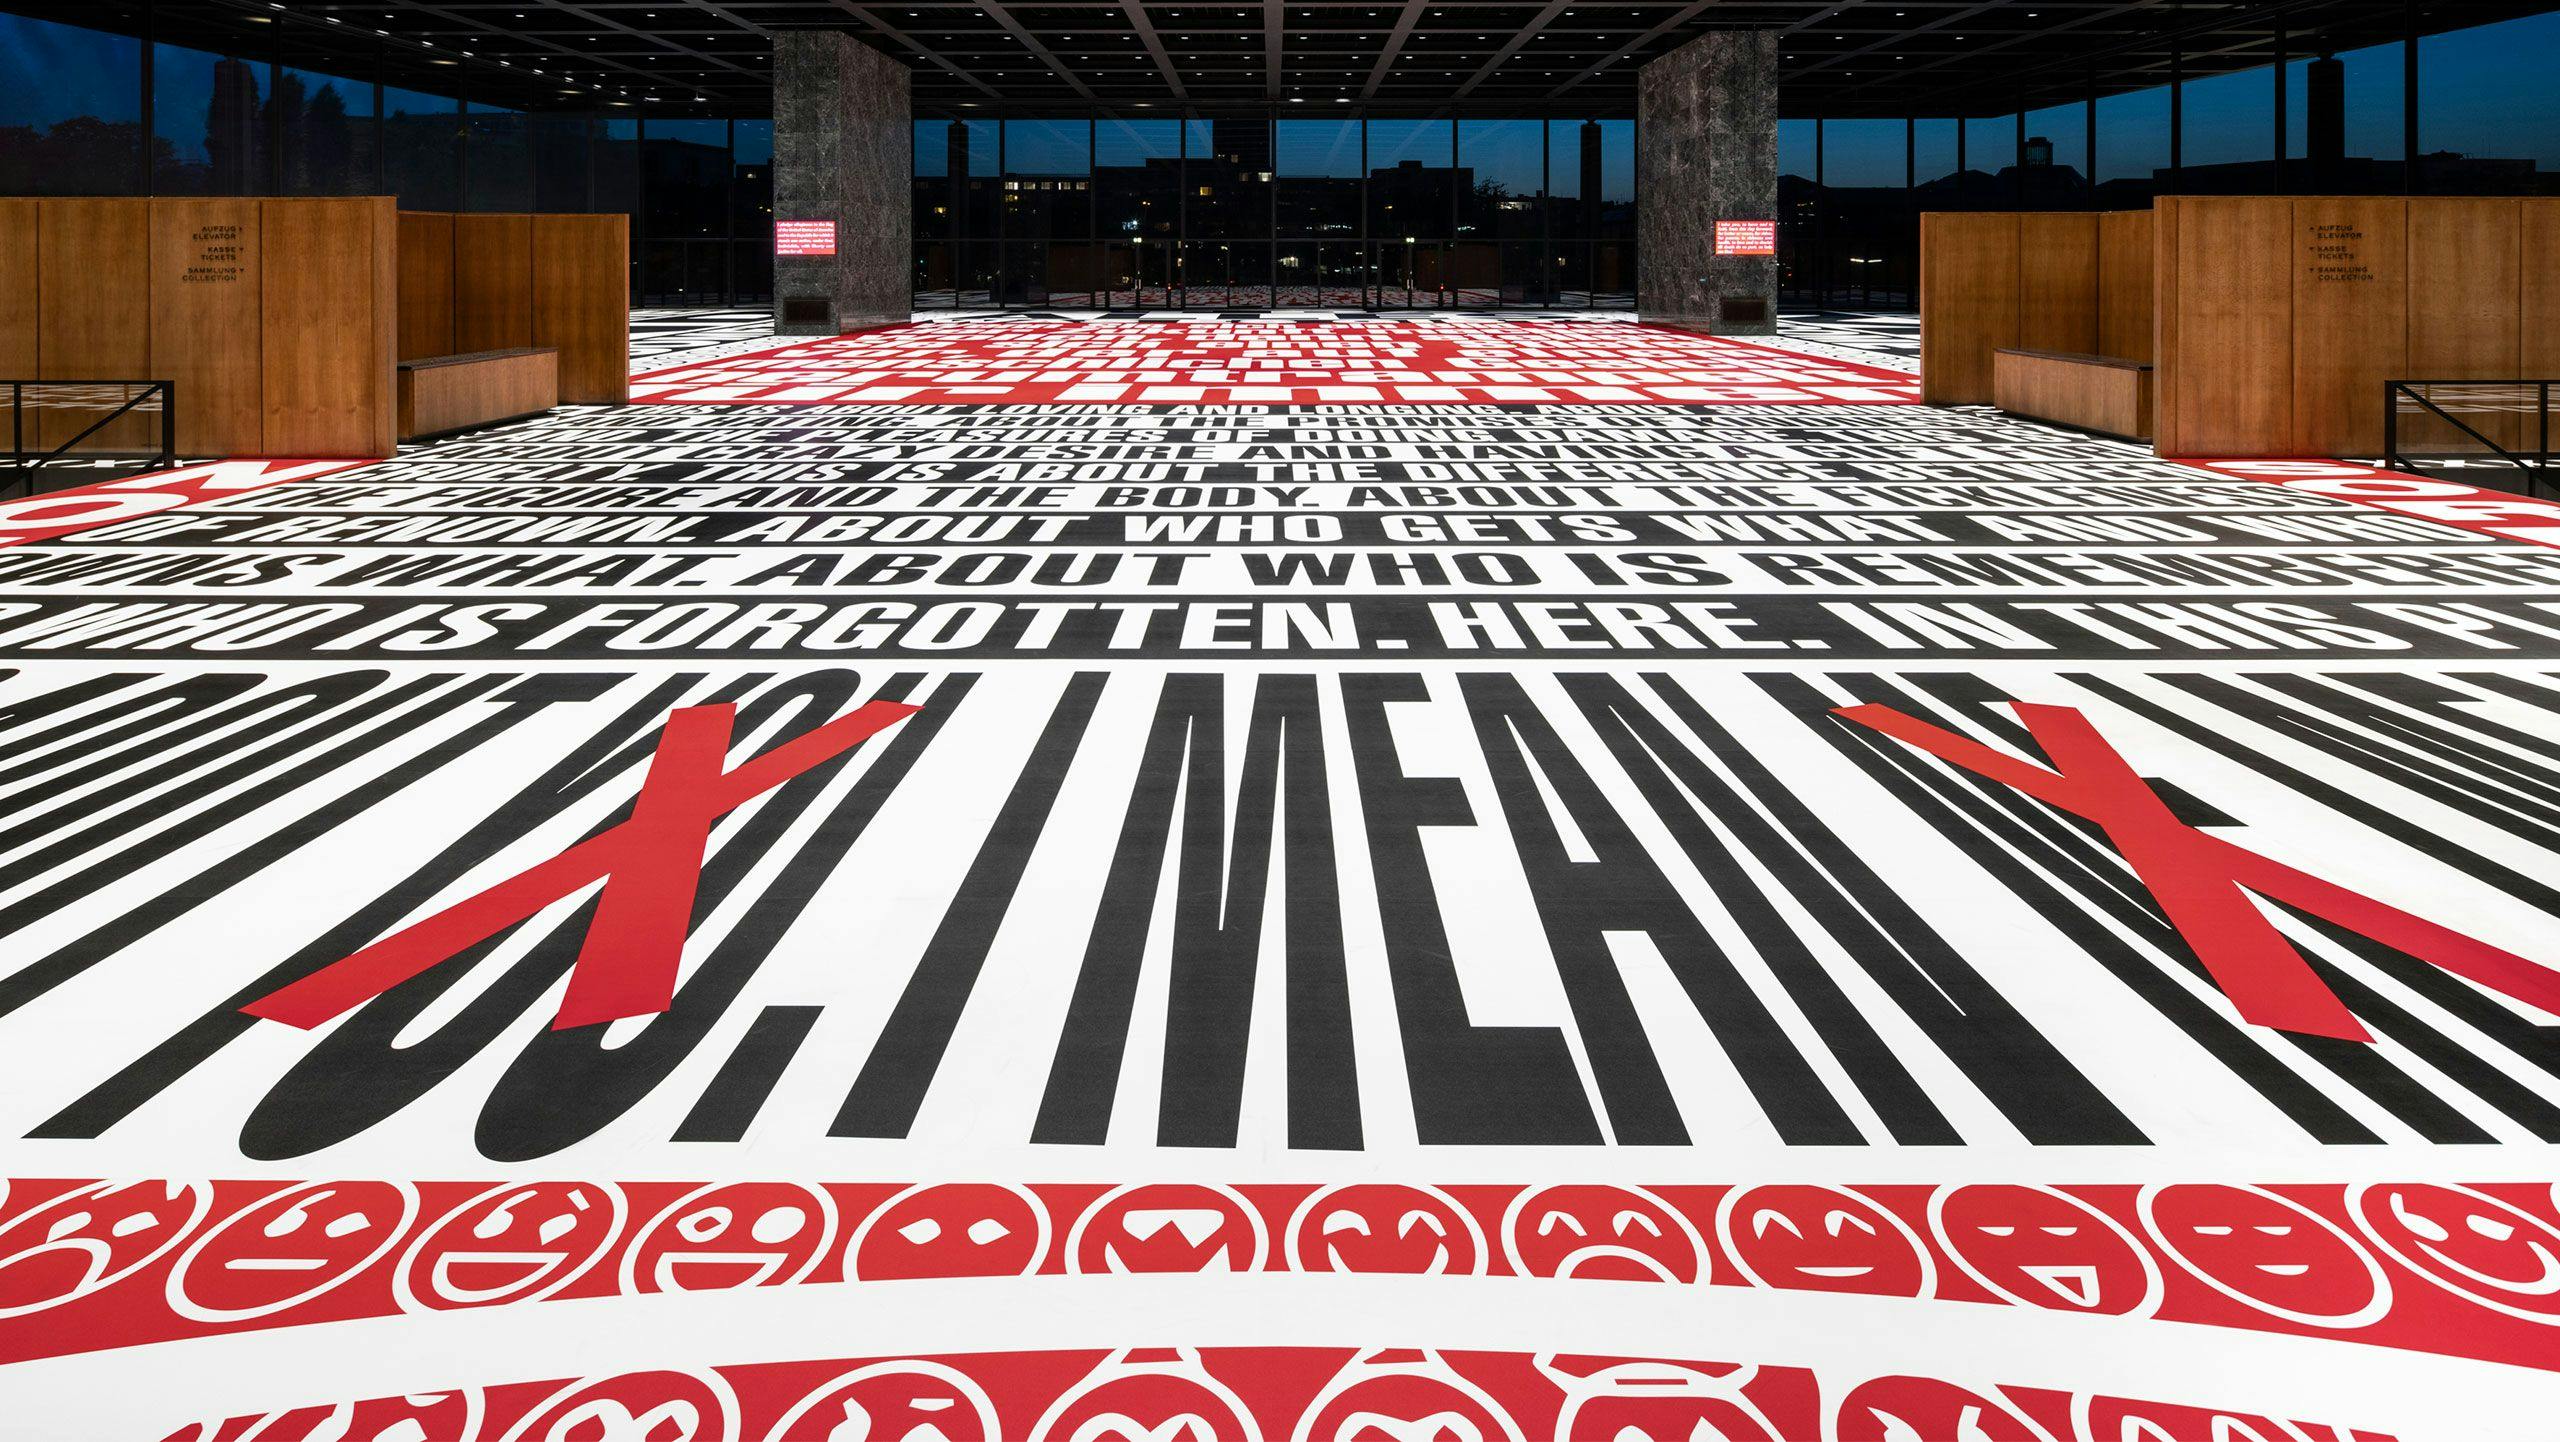 Installation view of the exhibition, Barbara Kruger: Bitte lachen / Please cry, at Neue Nationalgalerie in Berlin, dated 2022